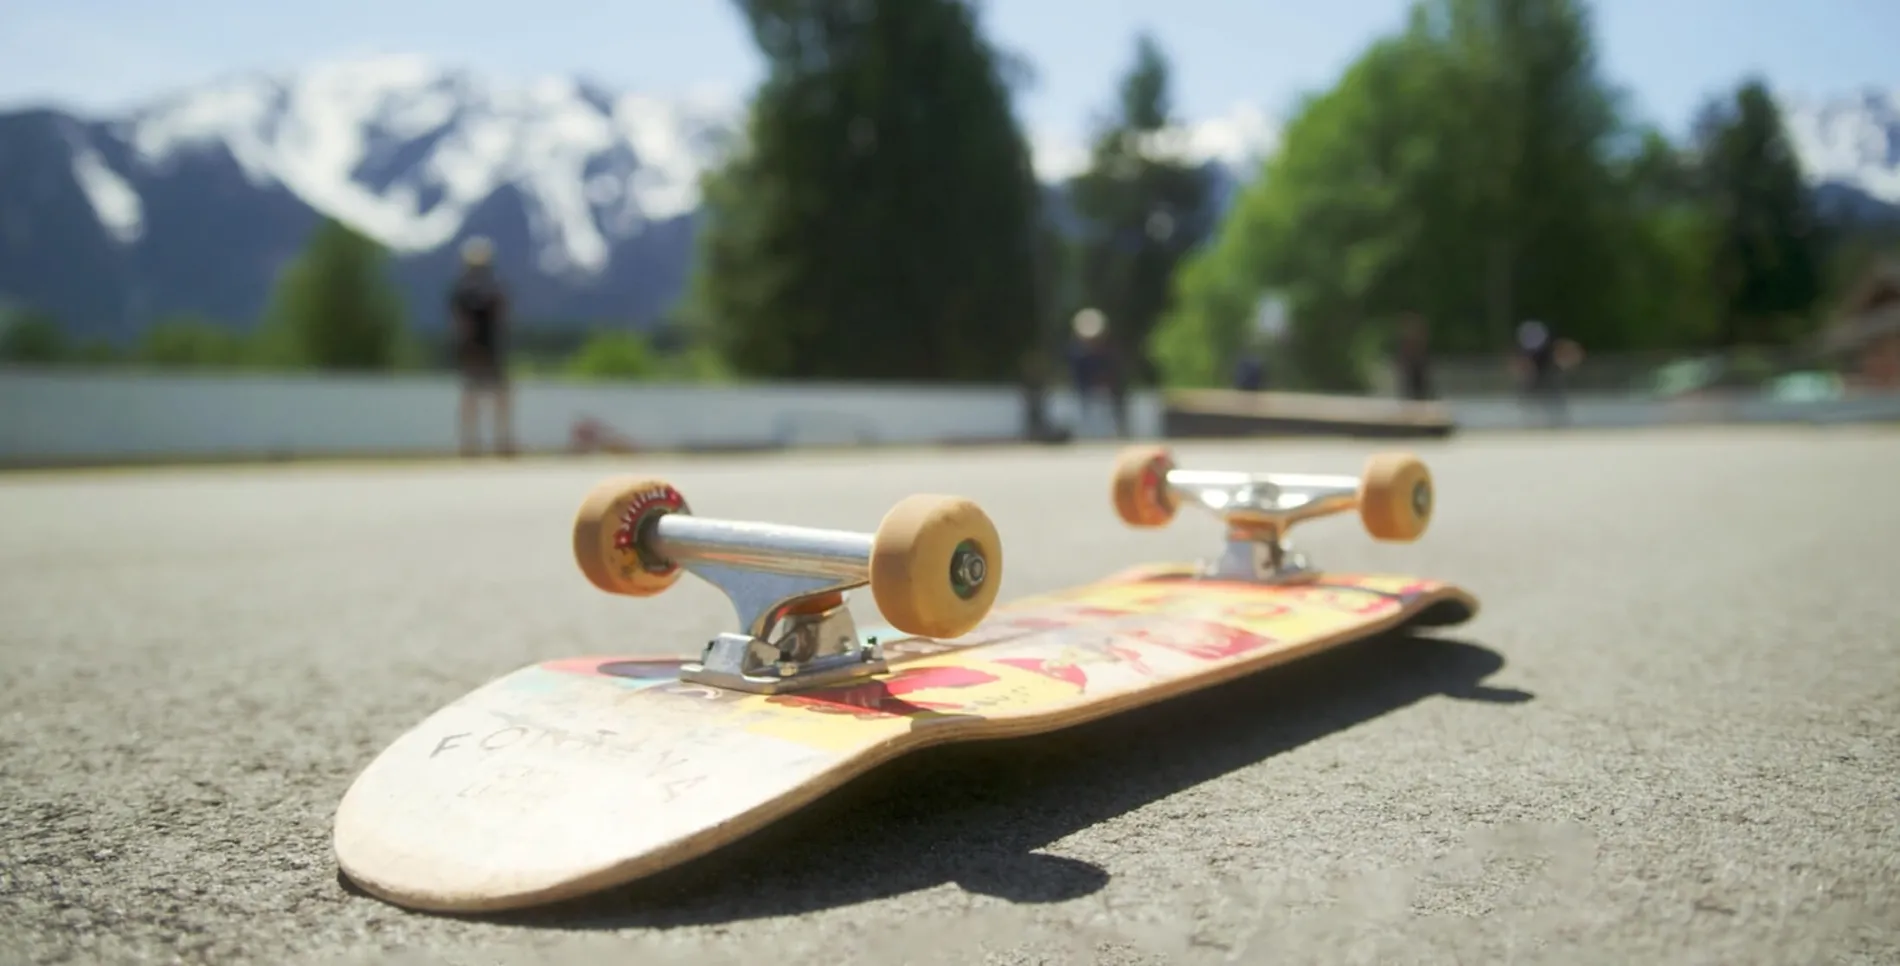 Skate board on ground with mountains in the background